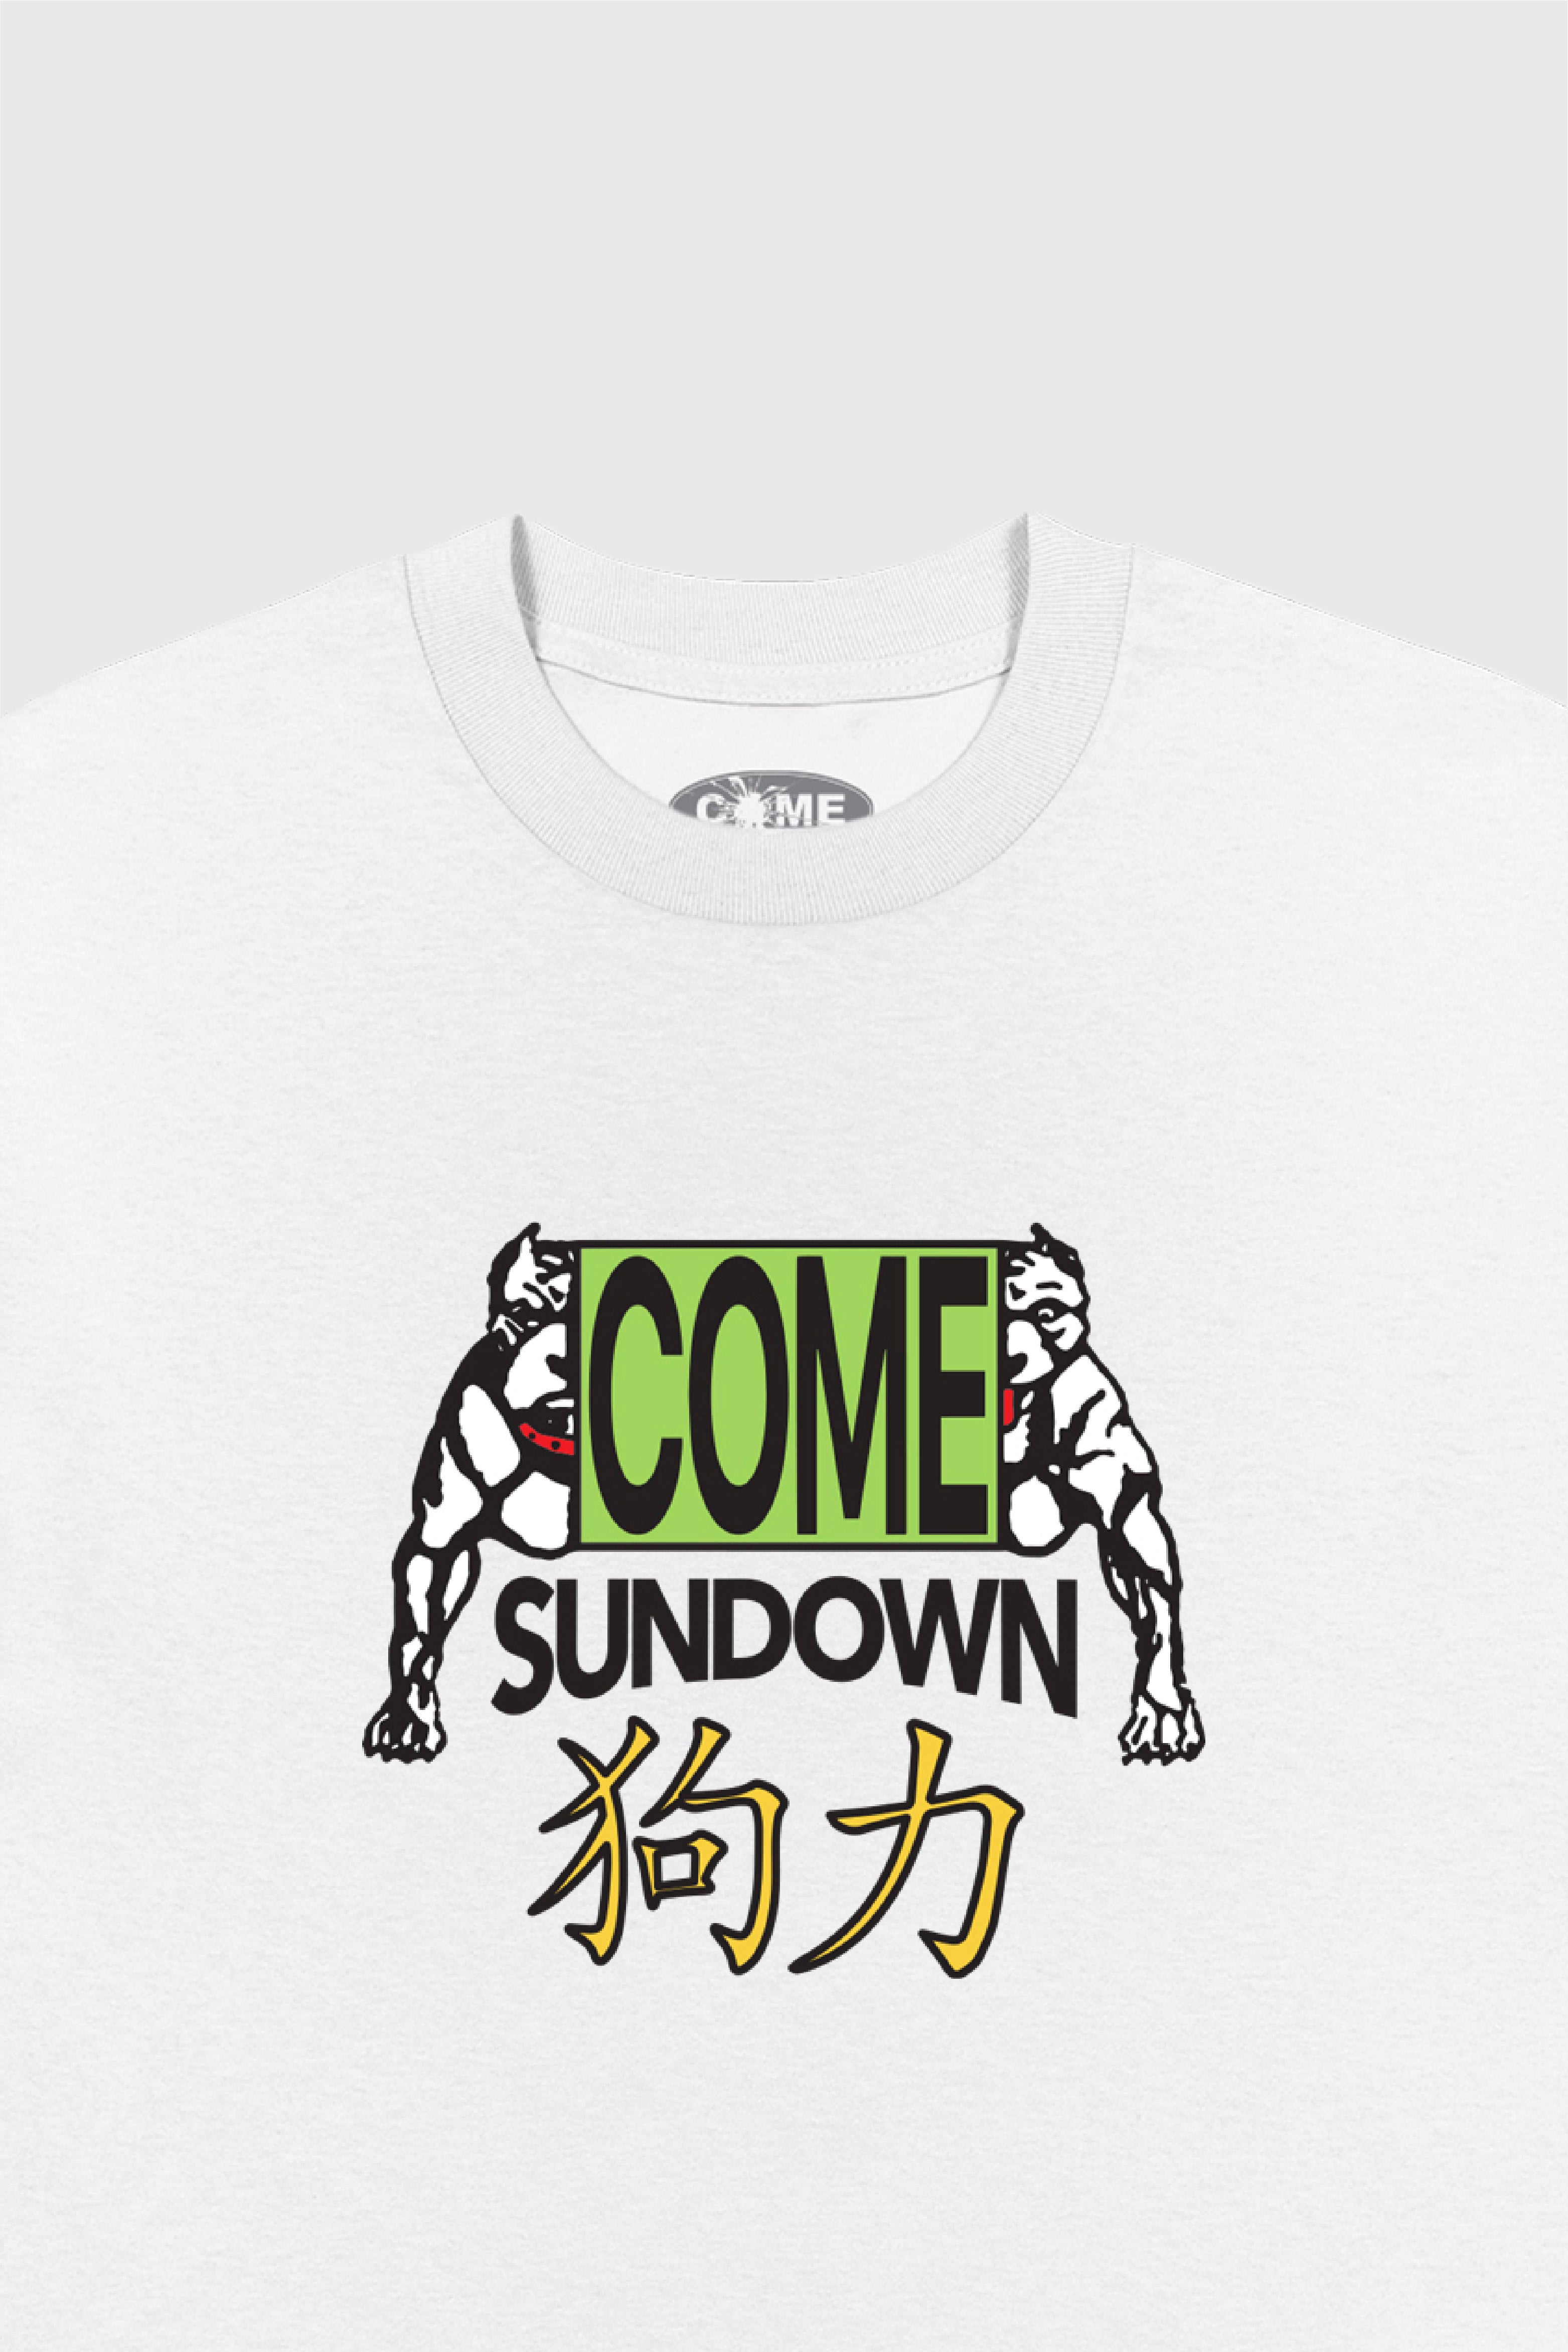 Selectshop FRAME - COME SUNDOWN Year Of Dogs Tee T-Shirts Concept Store Dubai